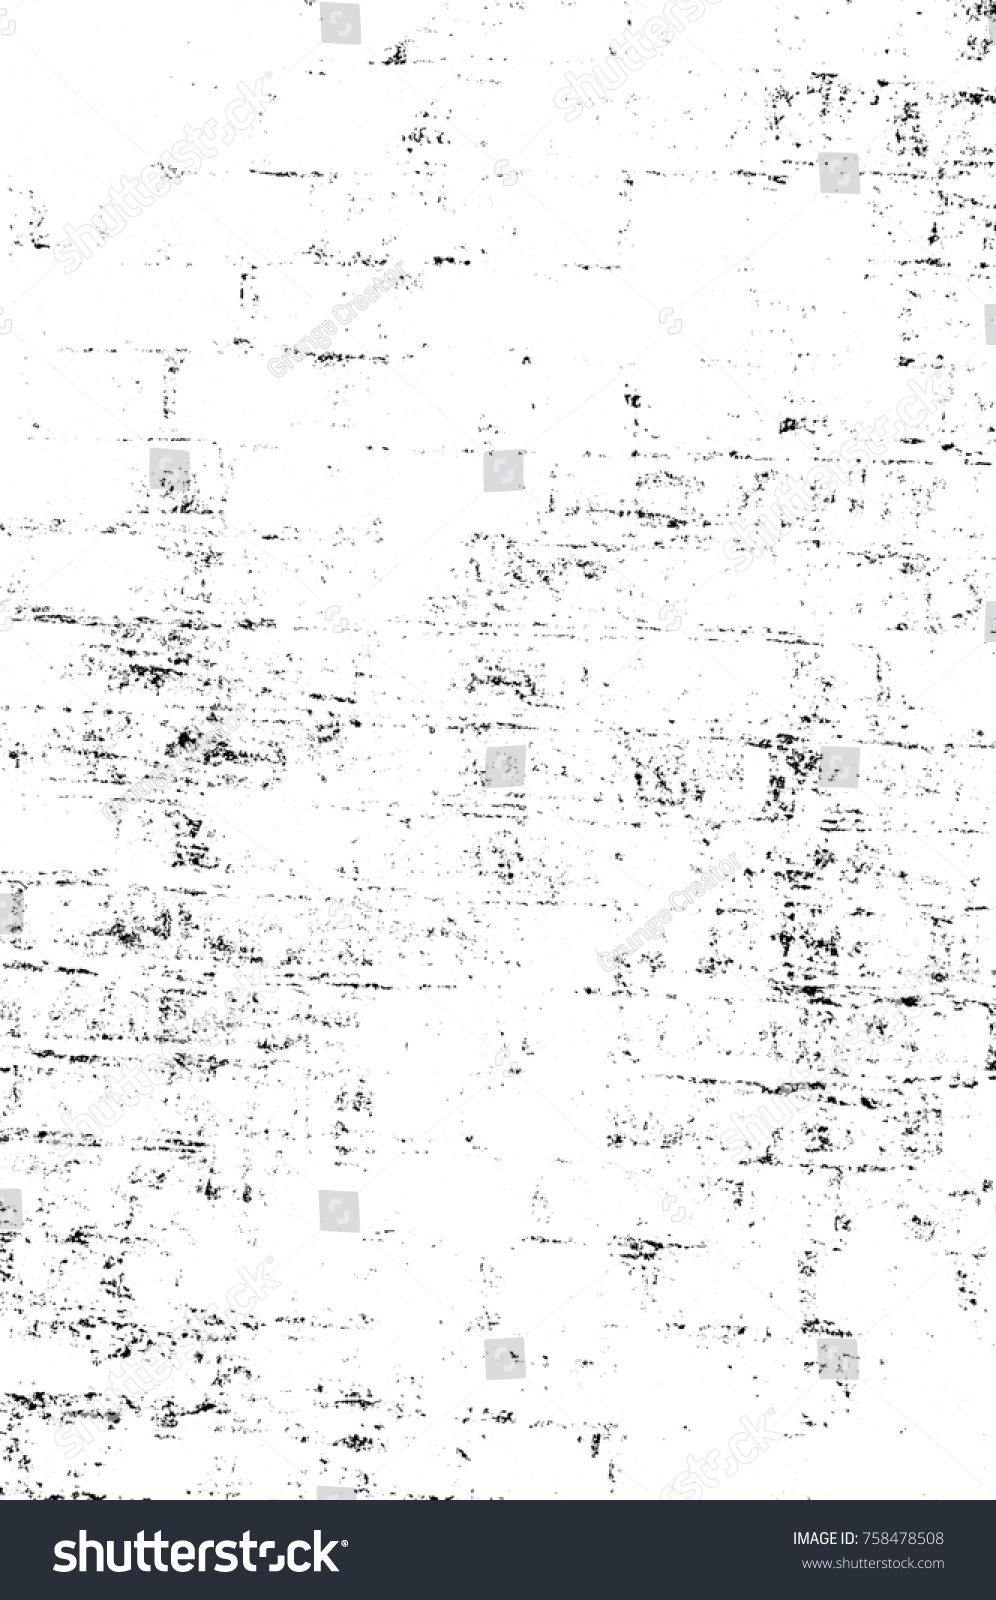 Grunge black and white seamless pattern. Monochrome abstract texture. Background of cracks, scuffs, chips, stains, ink spots, lines. Dark design background surface. Gray printing element #758478508